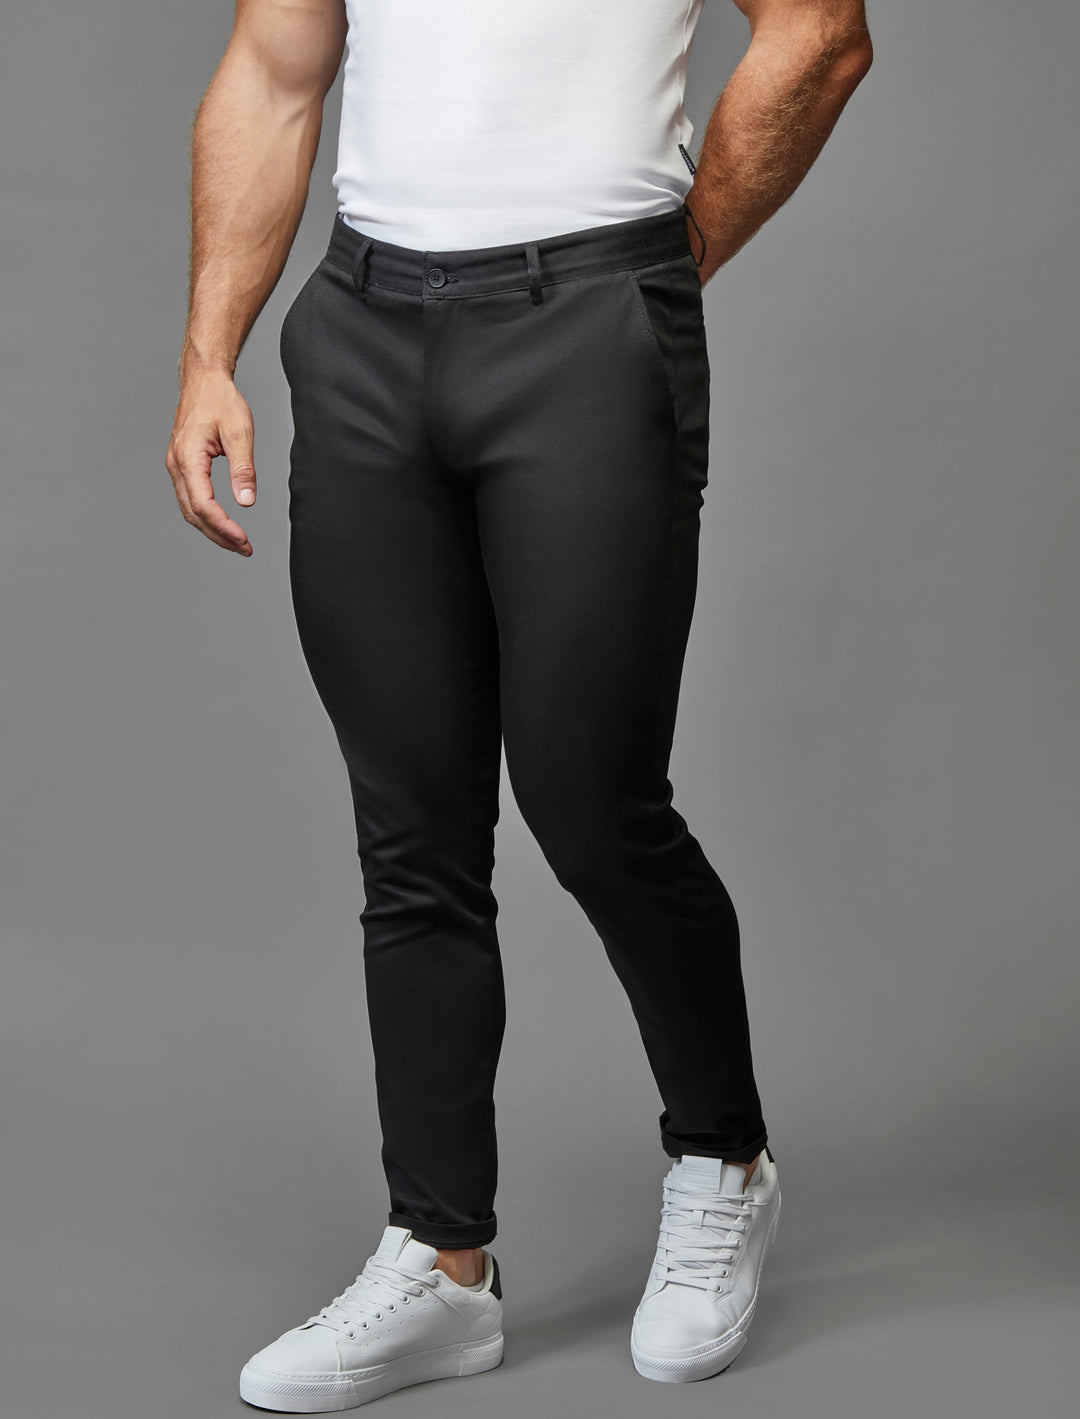 Black athletic fit chinos by Tapered Menswear, featuring stretch for a perfect fit.